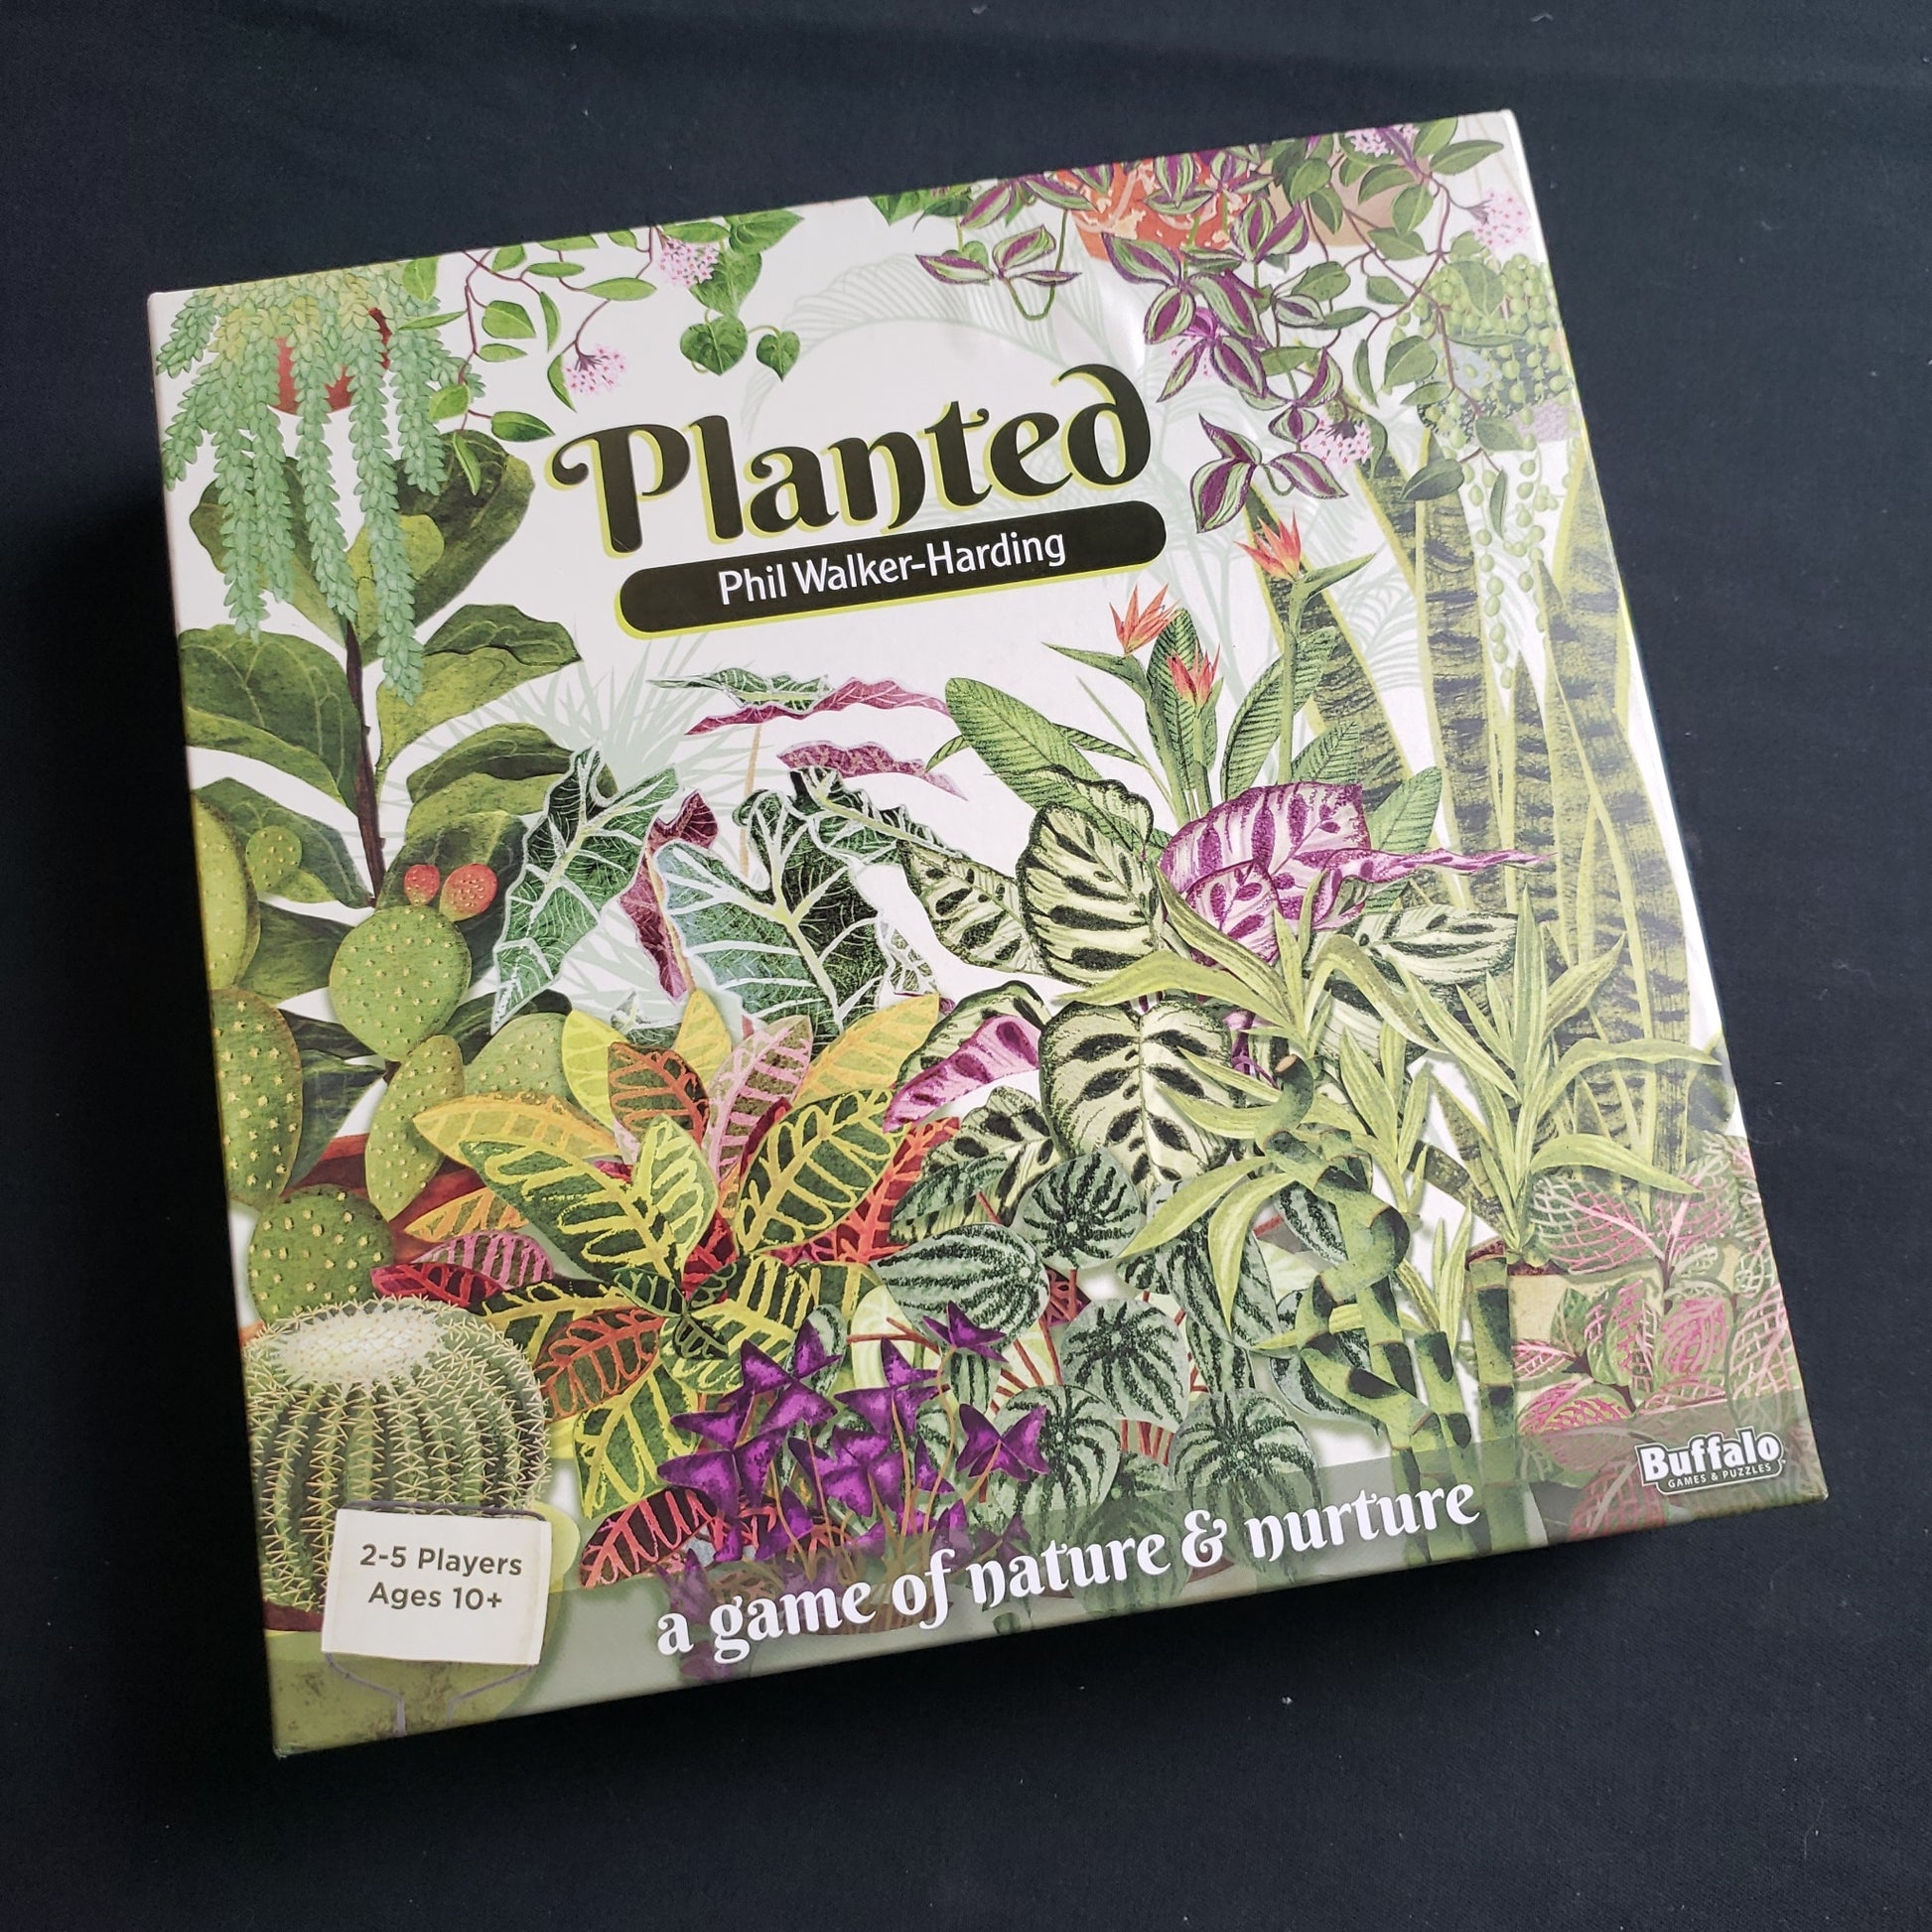 Image shows the front cover of the box of the Planted board game